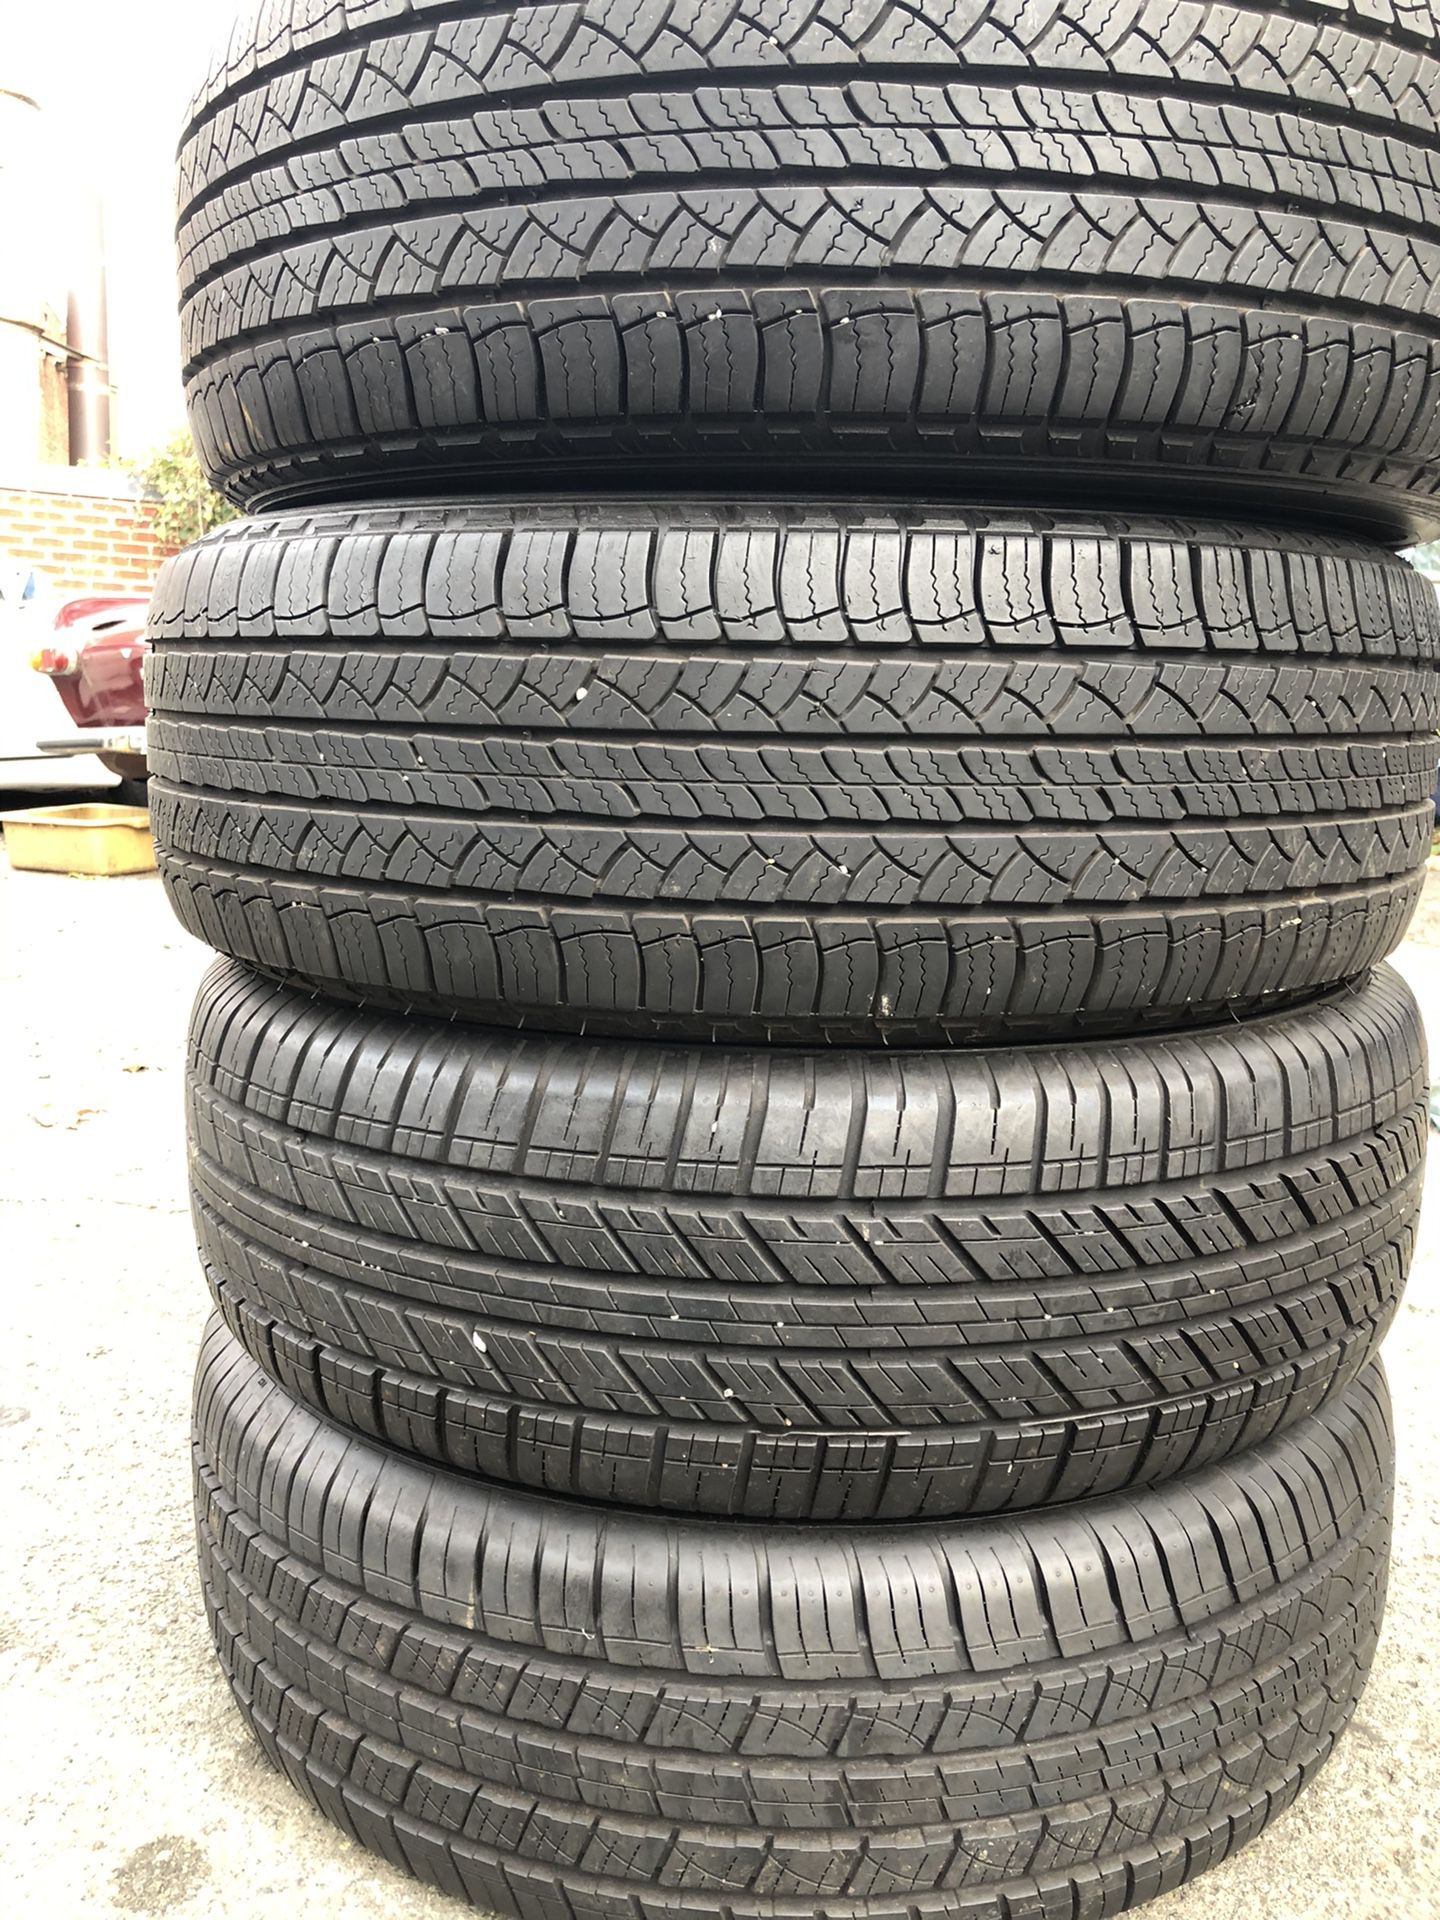 Set 4 usted tire 235/65R18 two MICHELIN one ATLAS and one IRONMAN one used tire have two patch set 4 used tire $250 4 llantas usadas 235/65R18 2 MICH